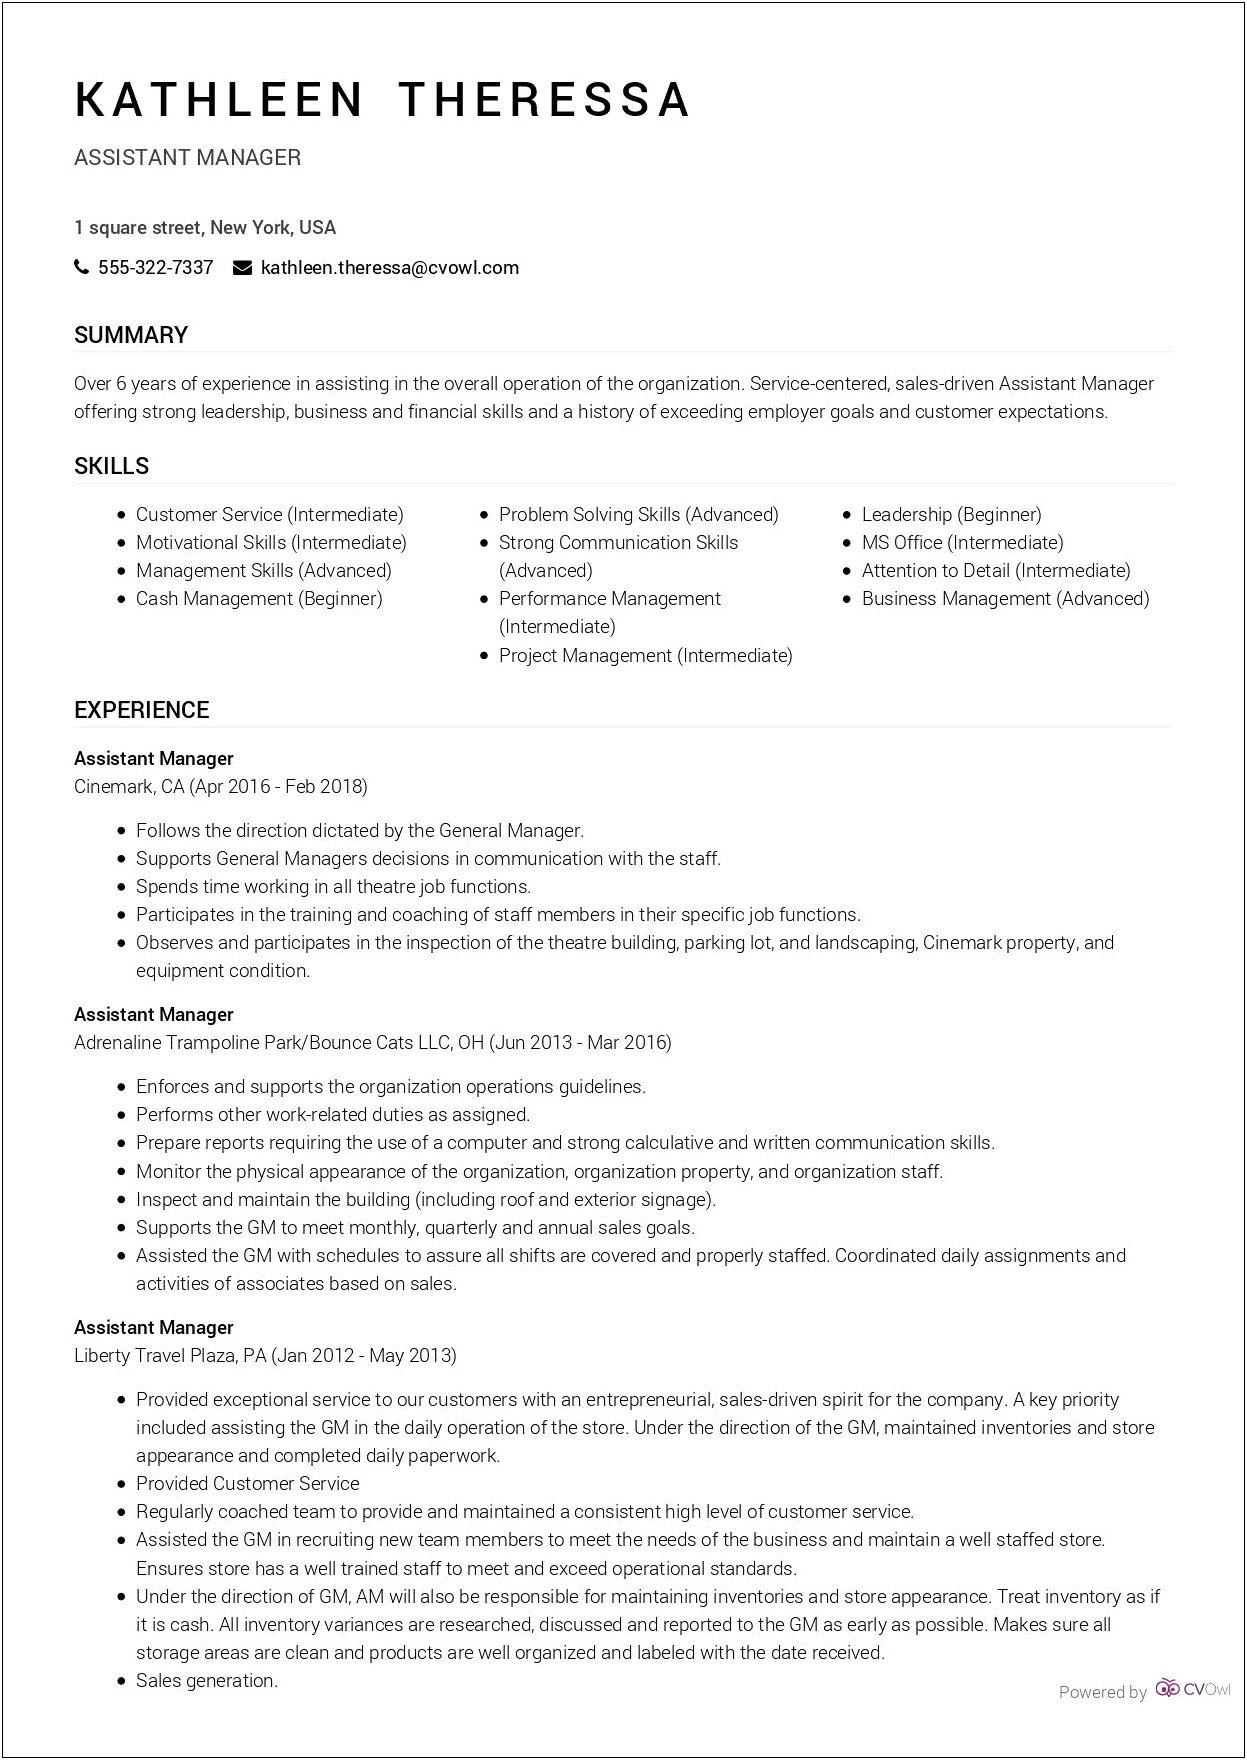 Example Of Resume For Assistant Manager